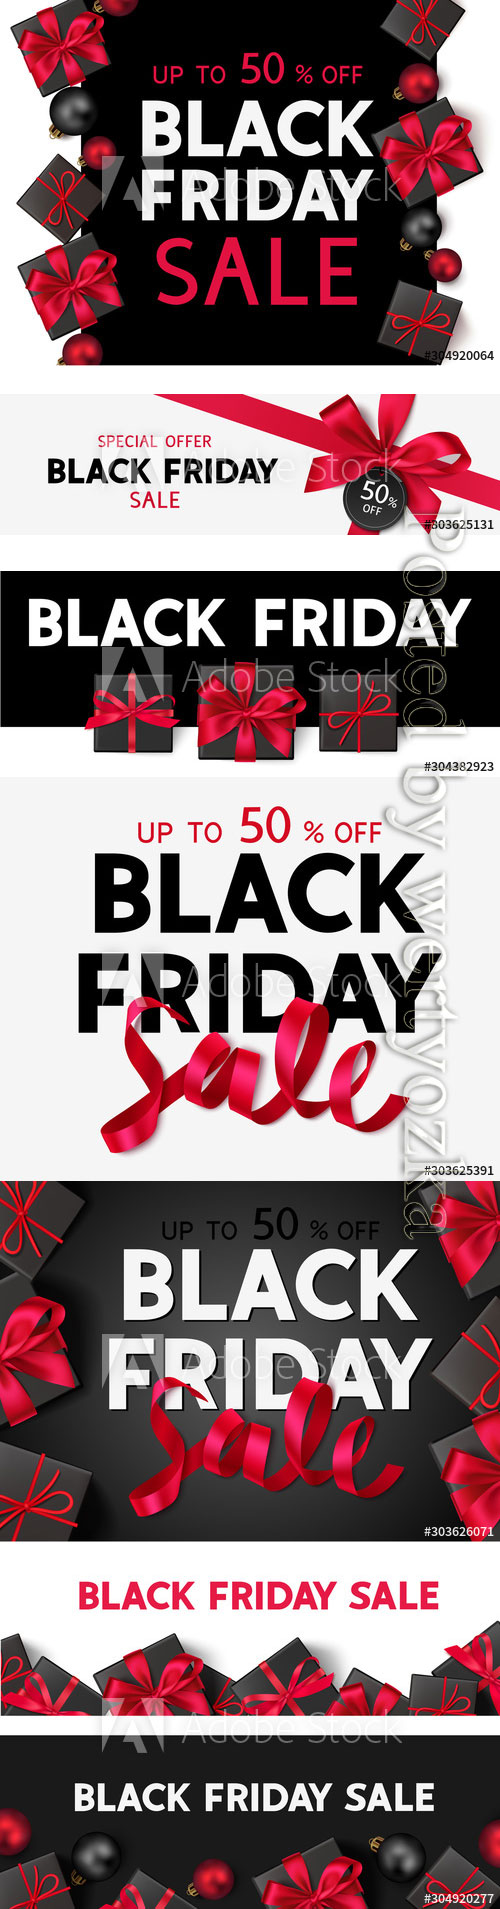 Black friday sale design template, gift boxes with red bow and text